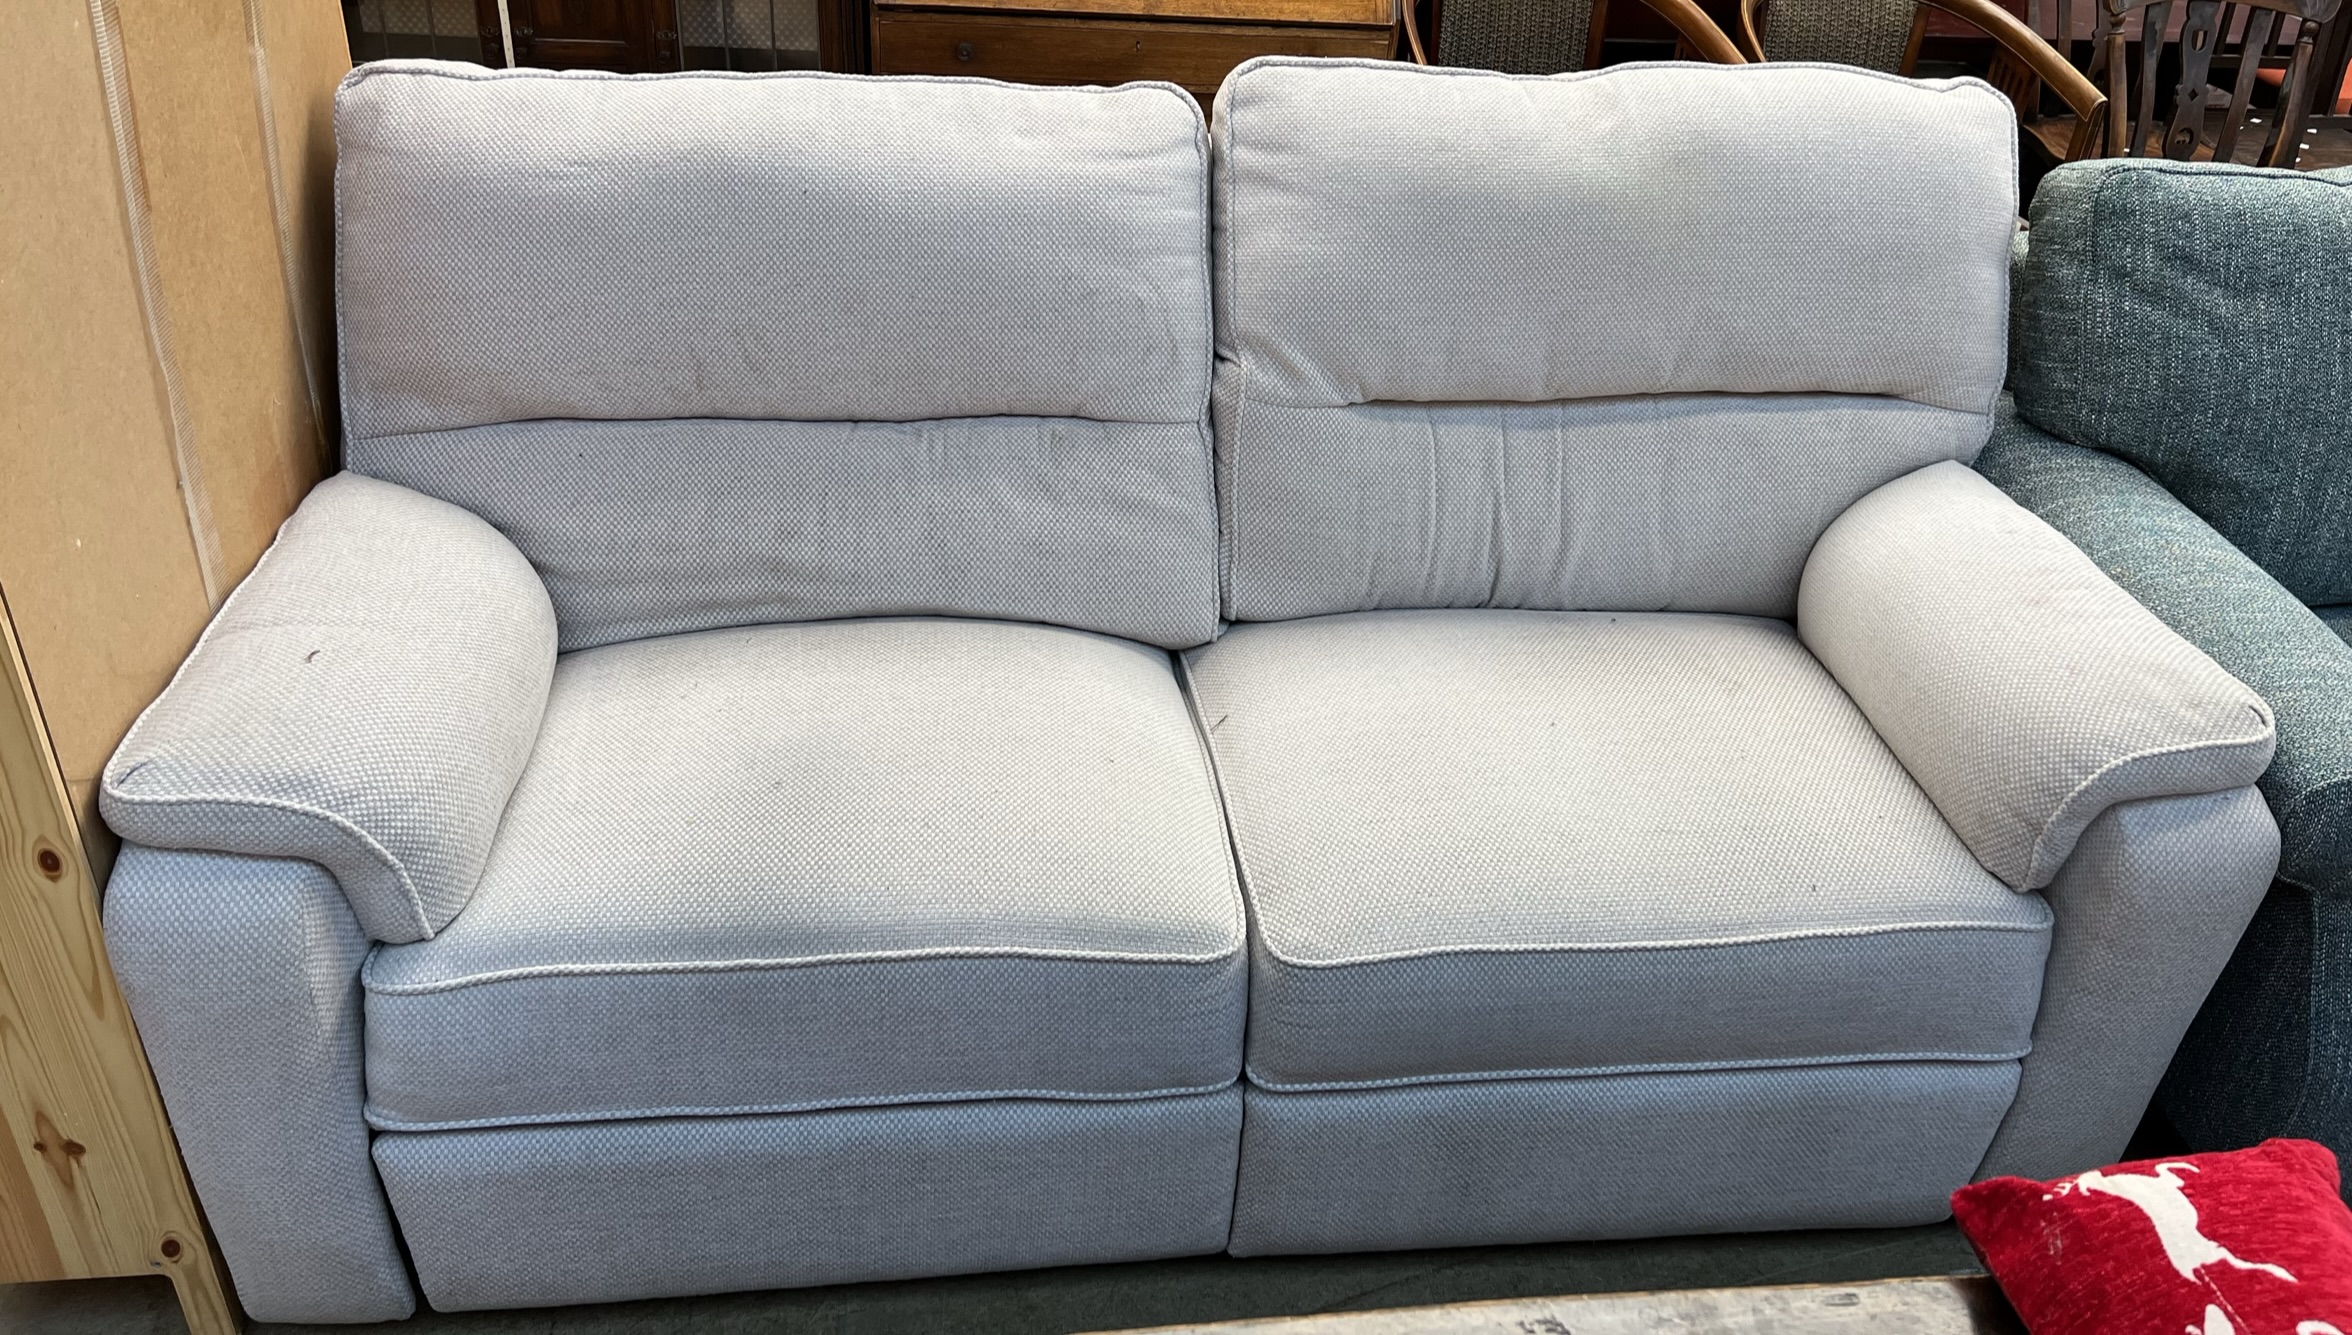 A three seater settee with recline action in cream